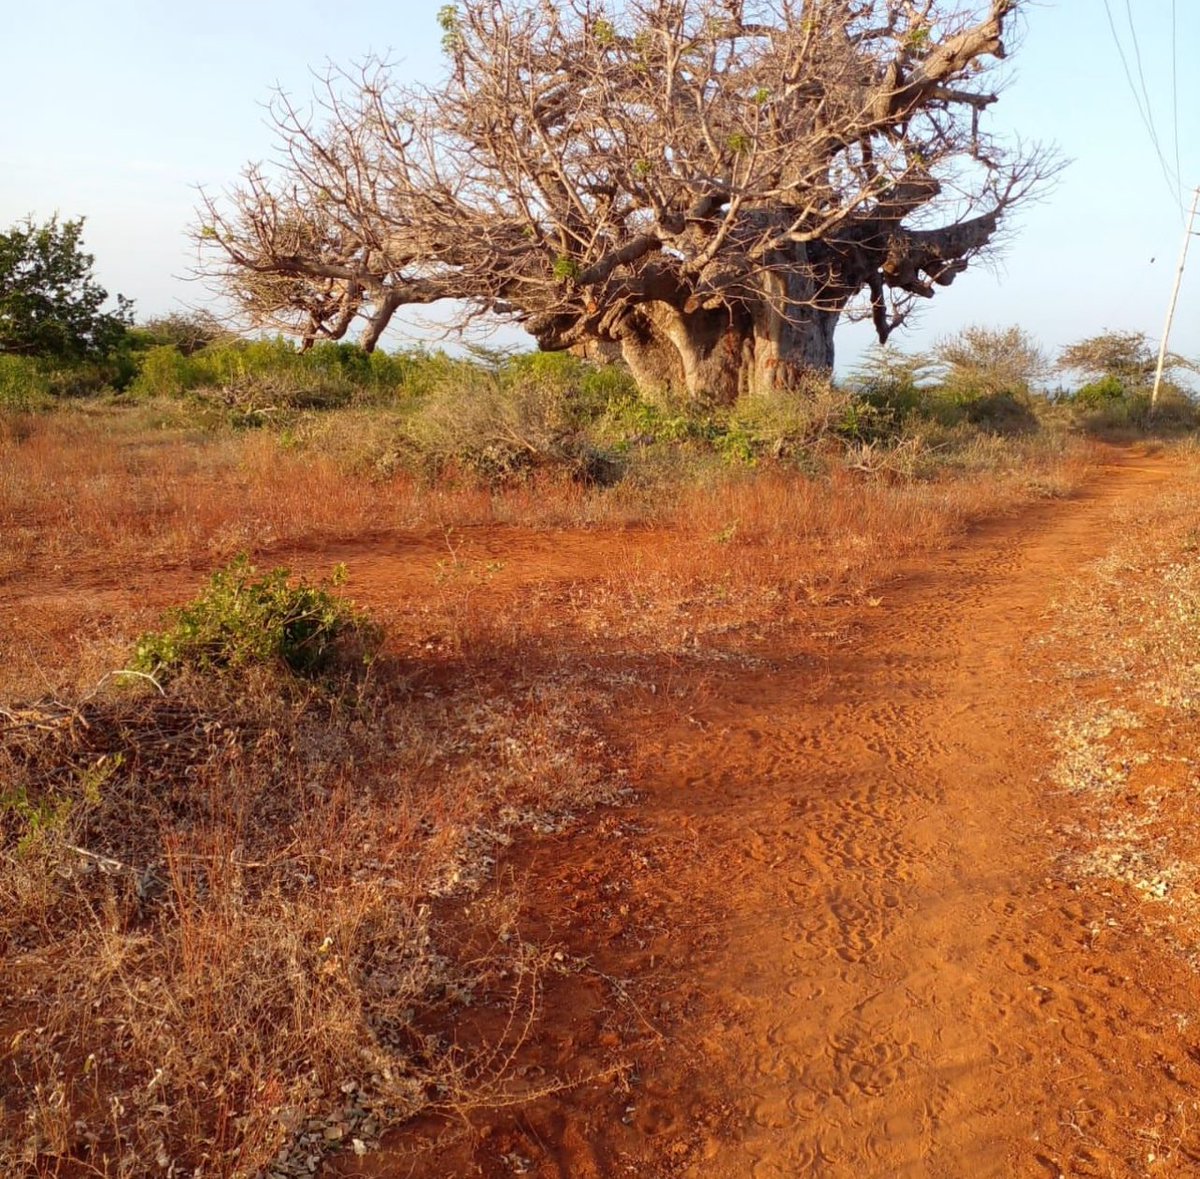 Discover the beauty and significance of baobab trees on Pate Island. These ancient giants combat climate change, offer superfood fruits, and hold cultural importance.Appreciate their resilience and environmental impact #ArchipelagoFarms #BaobabTrees #PateIsland #SustainableLiving